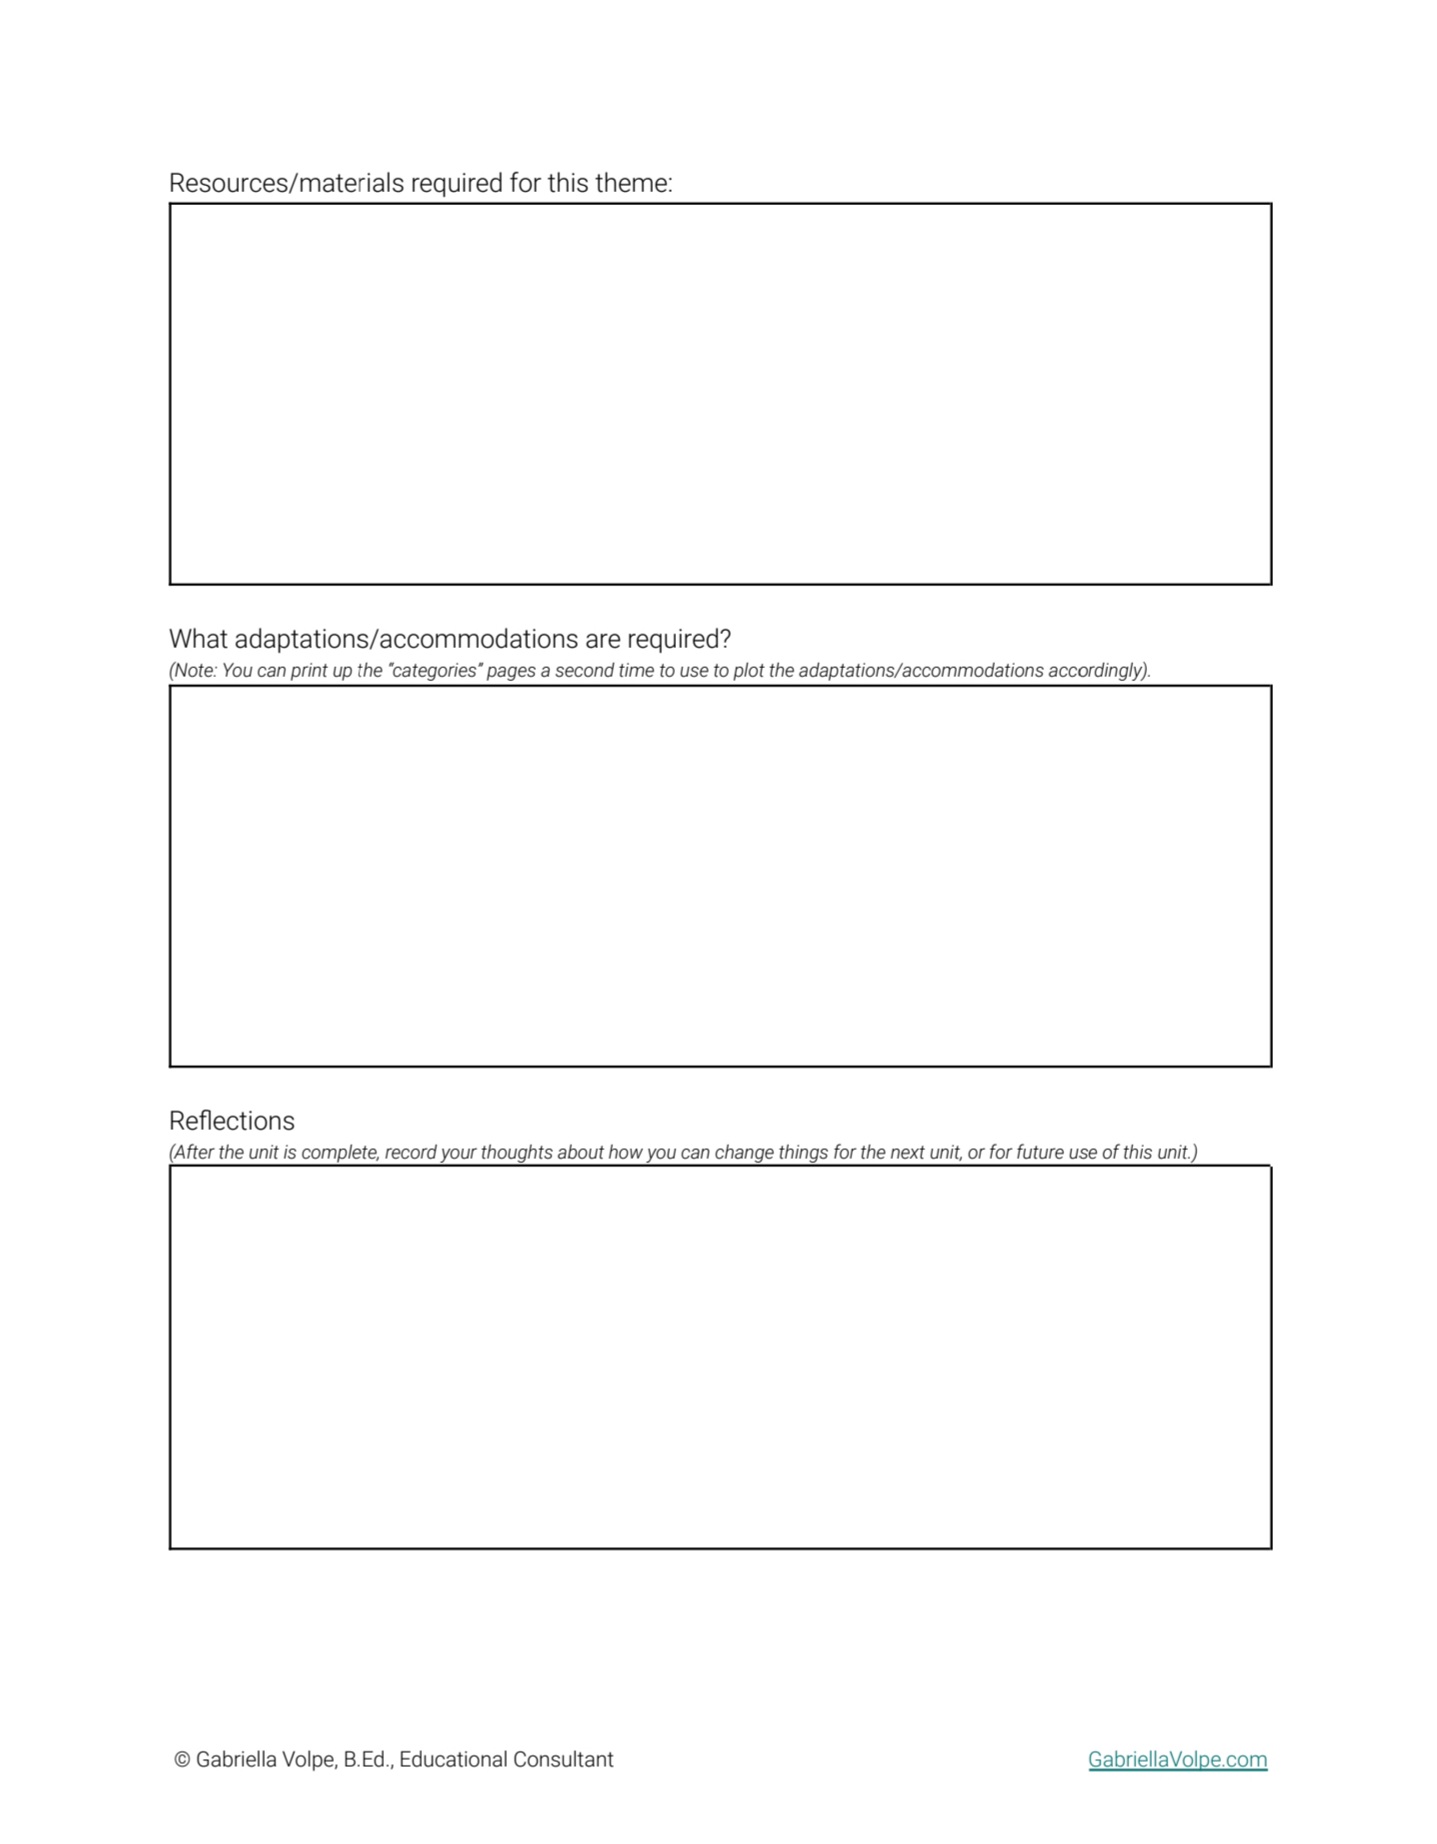 Thumbnail of PDF sample page from Thematic Unit Planner